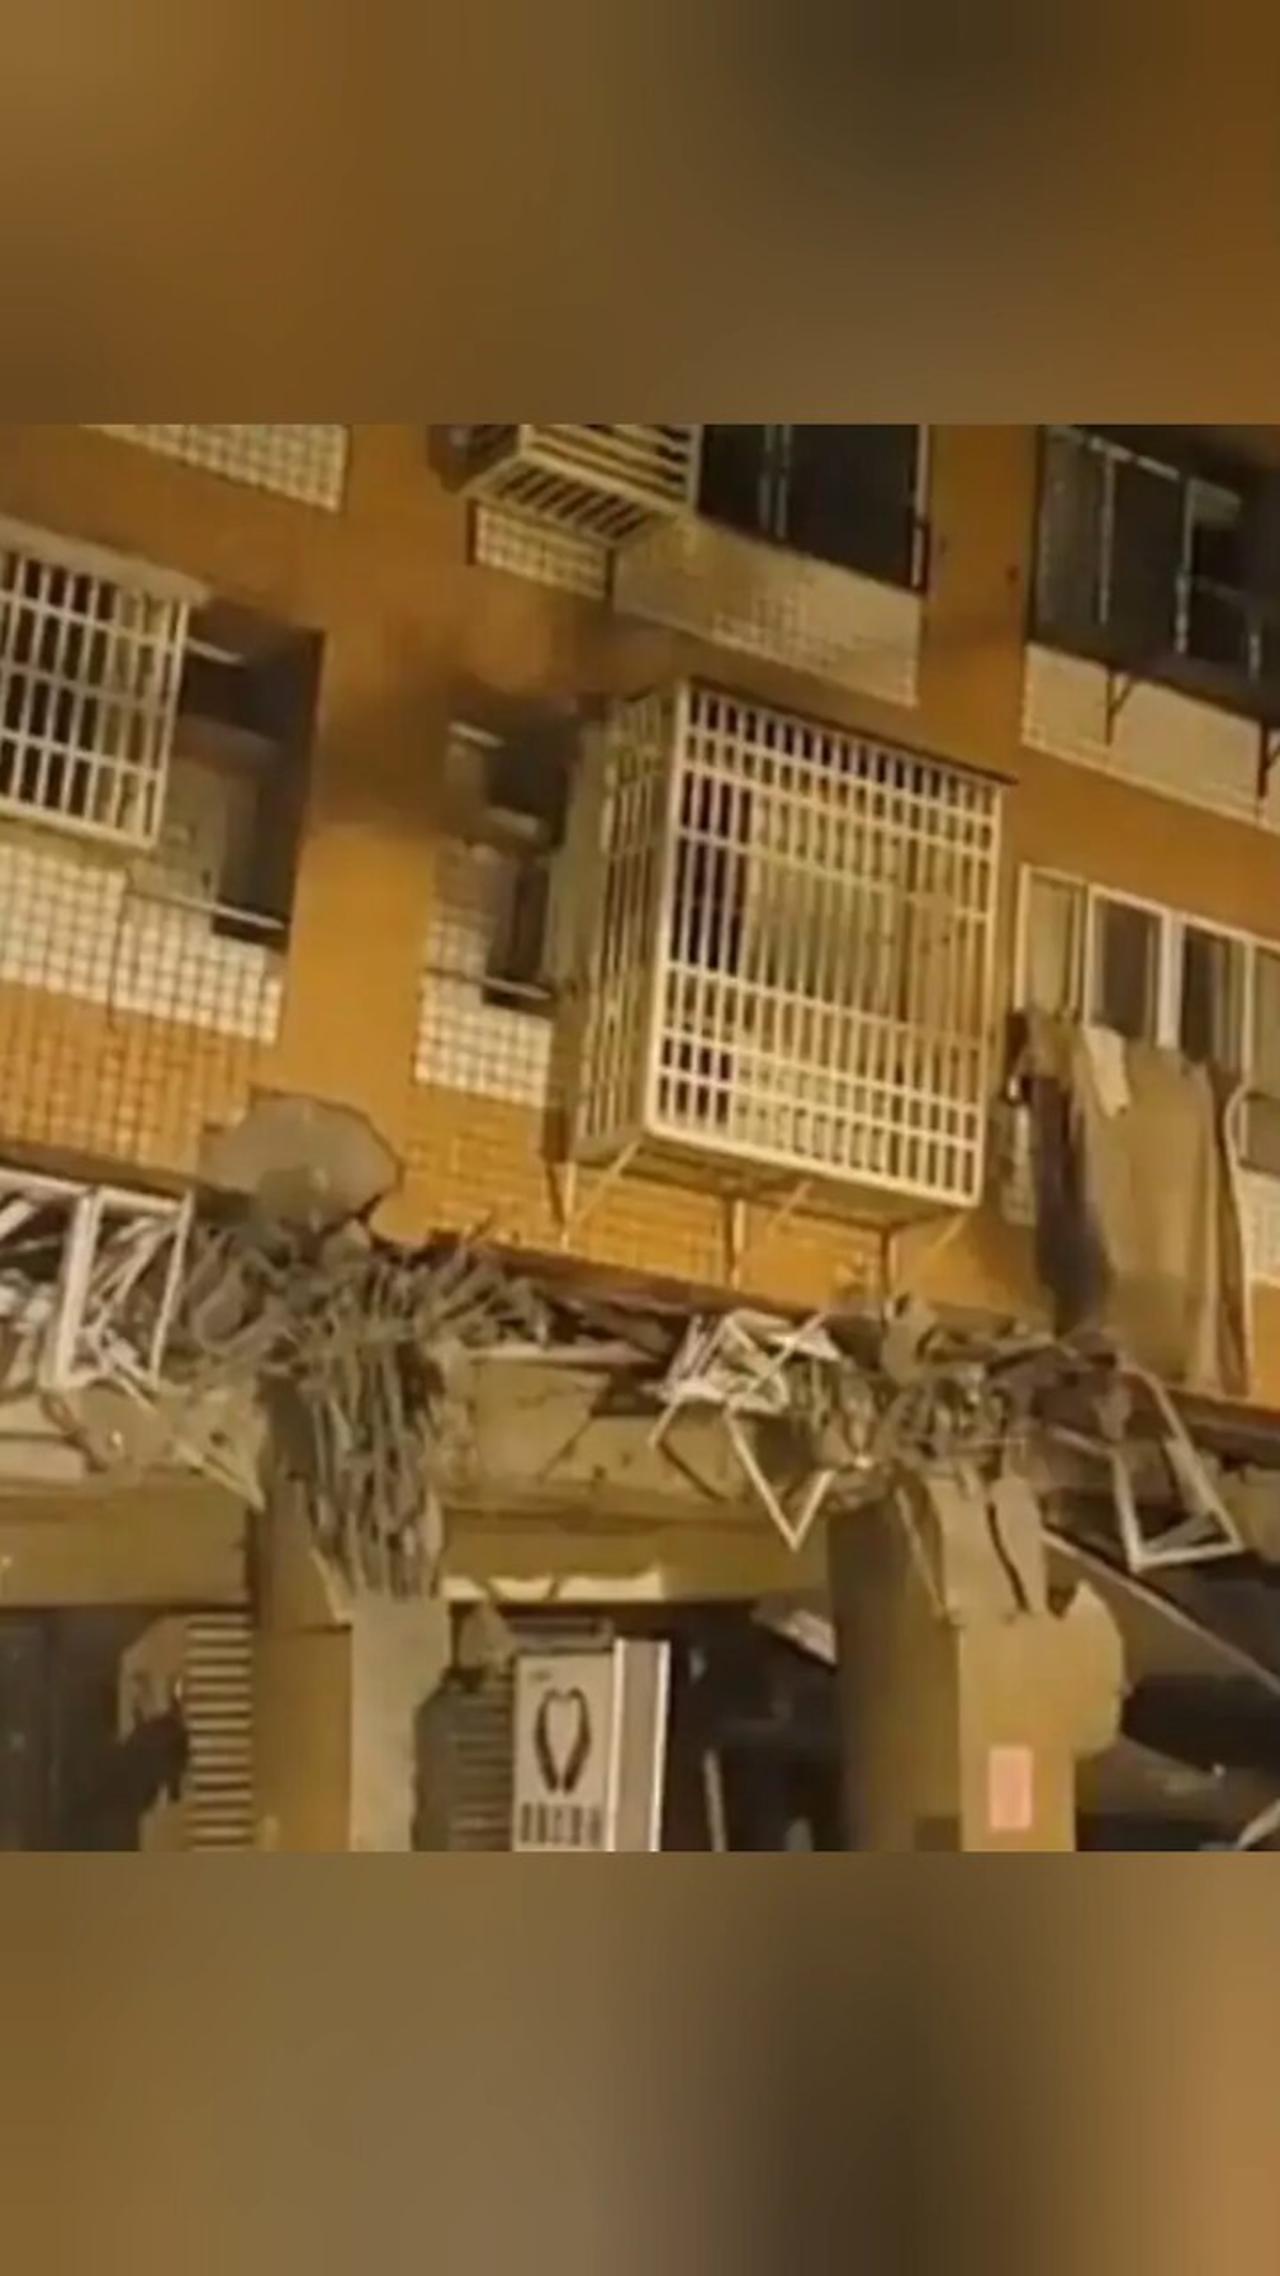 "Taiwan Earthquake Update: 80 Tremors Shake Buildings, No Casualties Reported"